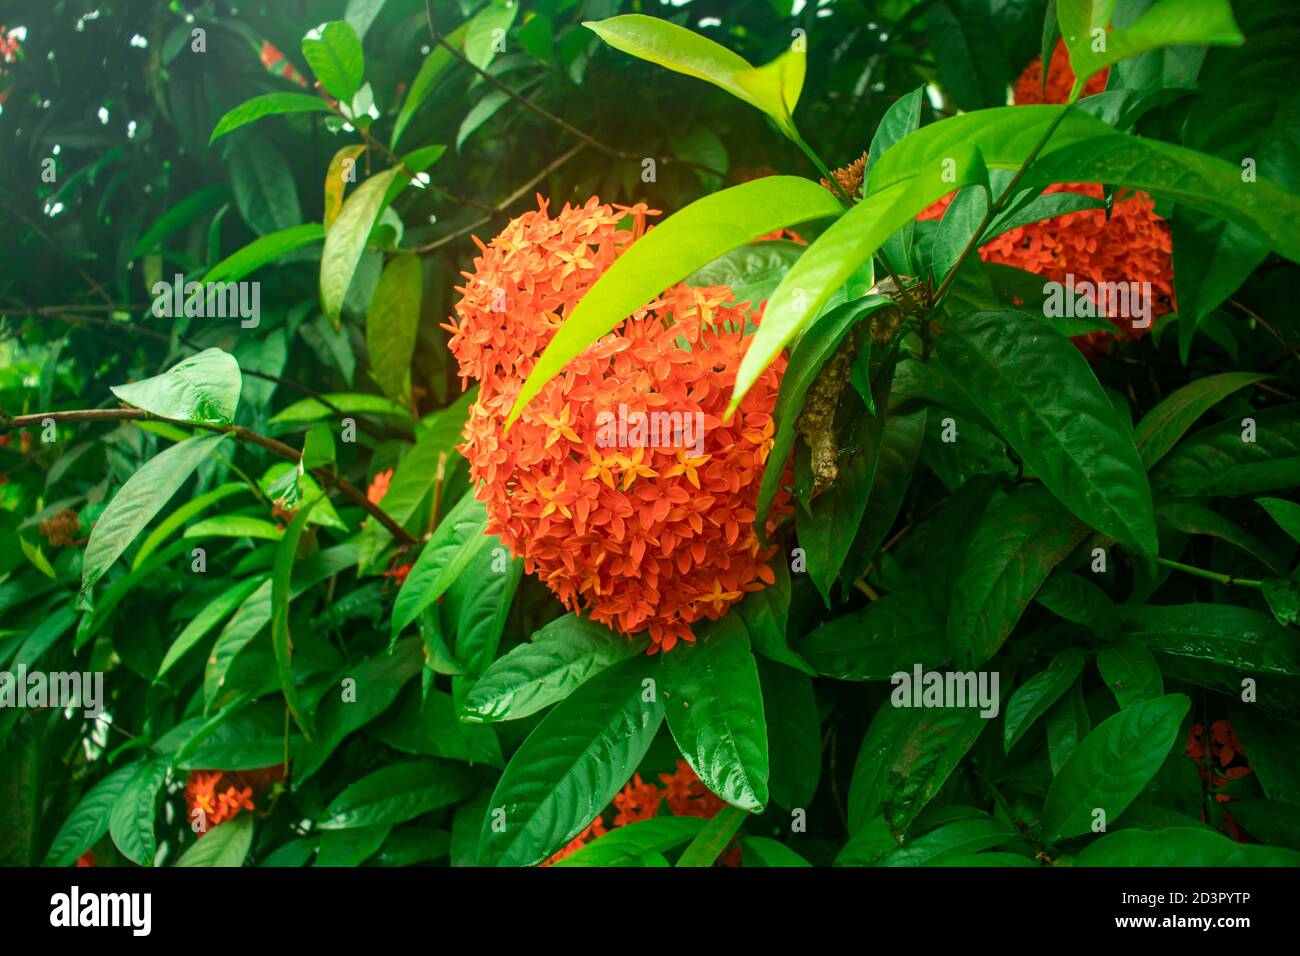 Ixora or Rangoon is a genus of flowering plants in the family Rubiaceae comes in verity colors Stock Photo